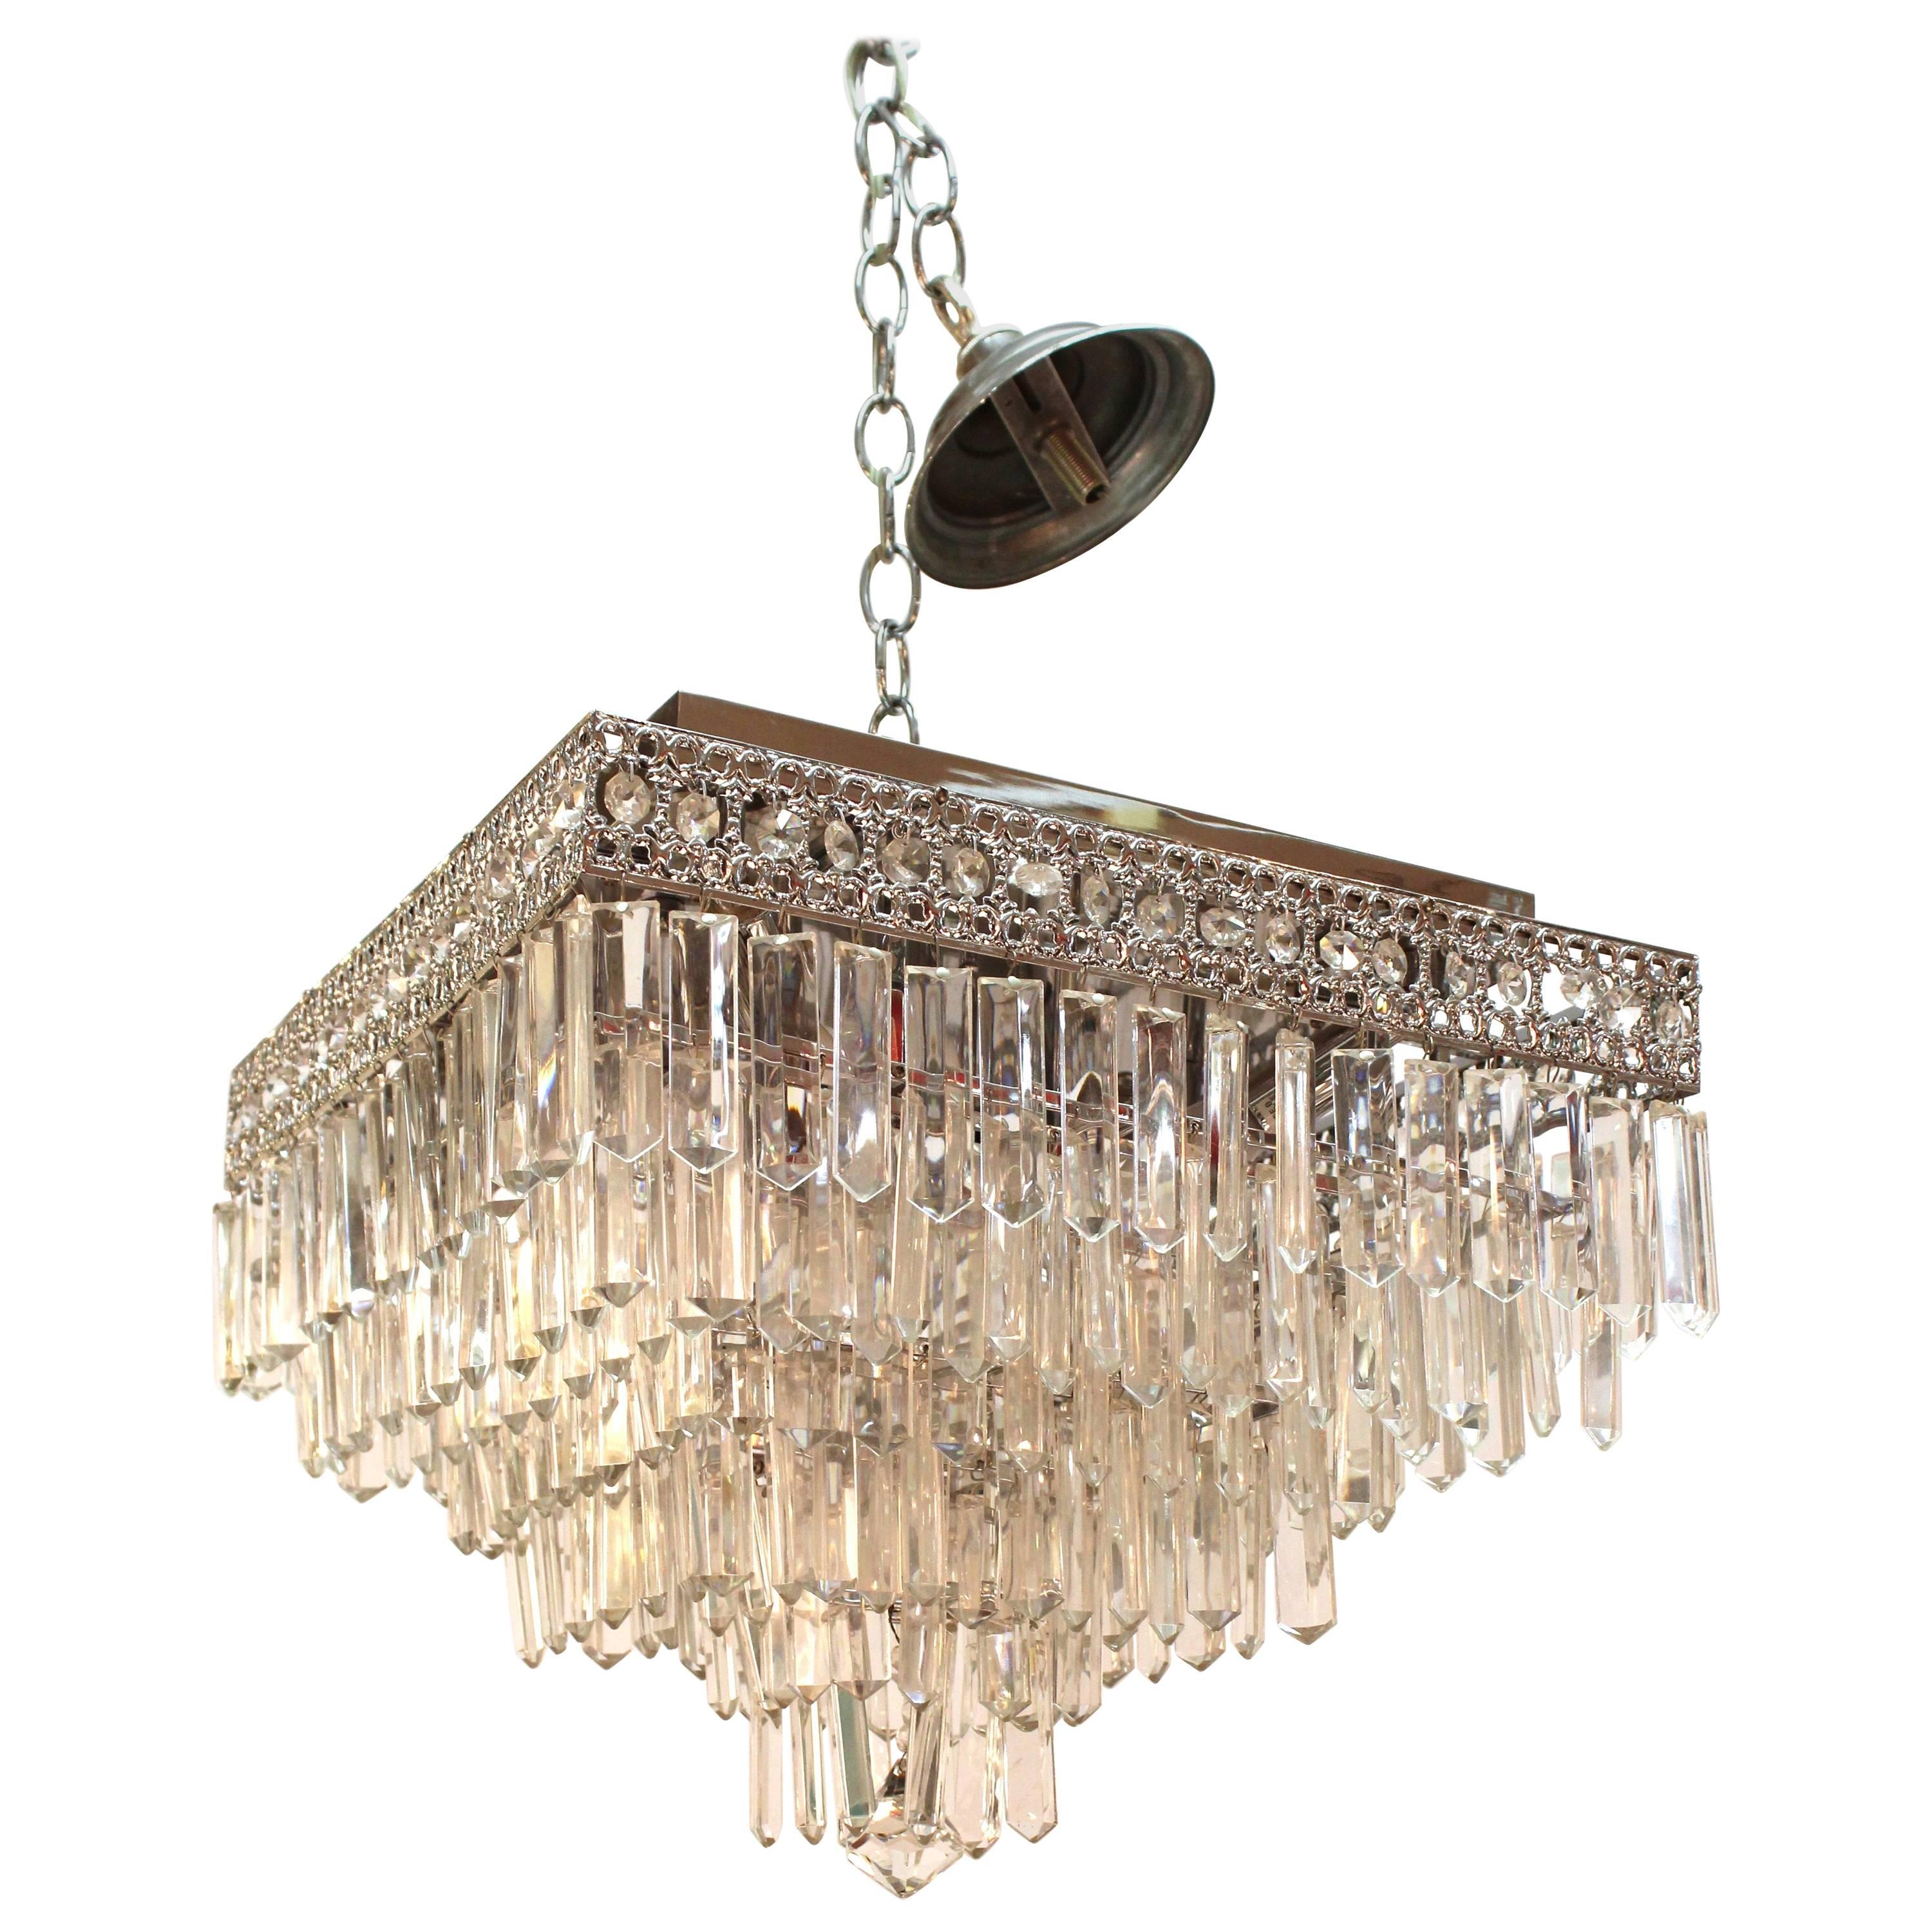 Italian Mid-Century Modern Chrome Chandelier with Murano Crystal Prisms